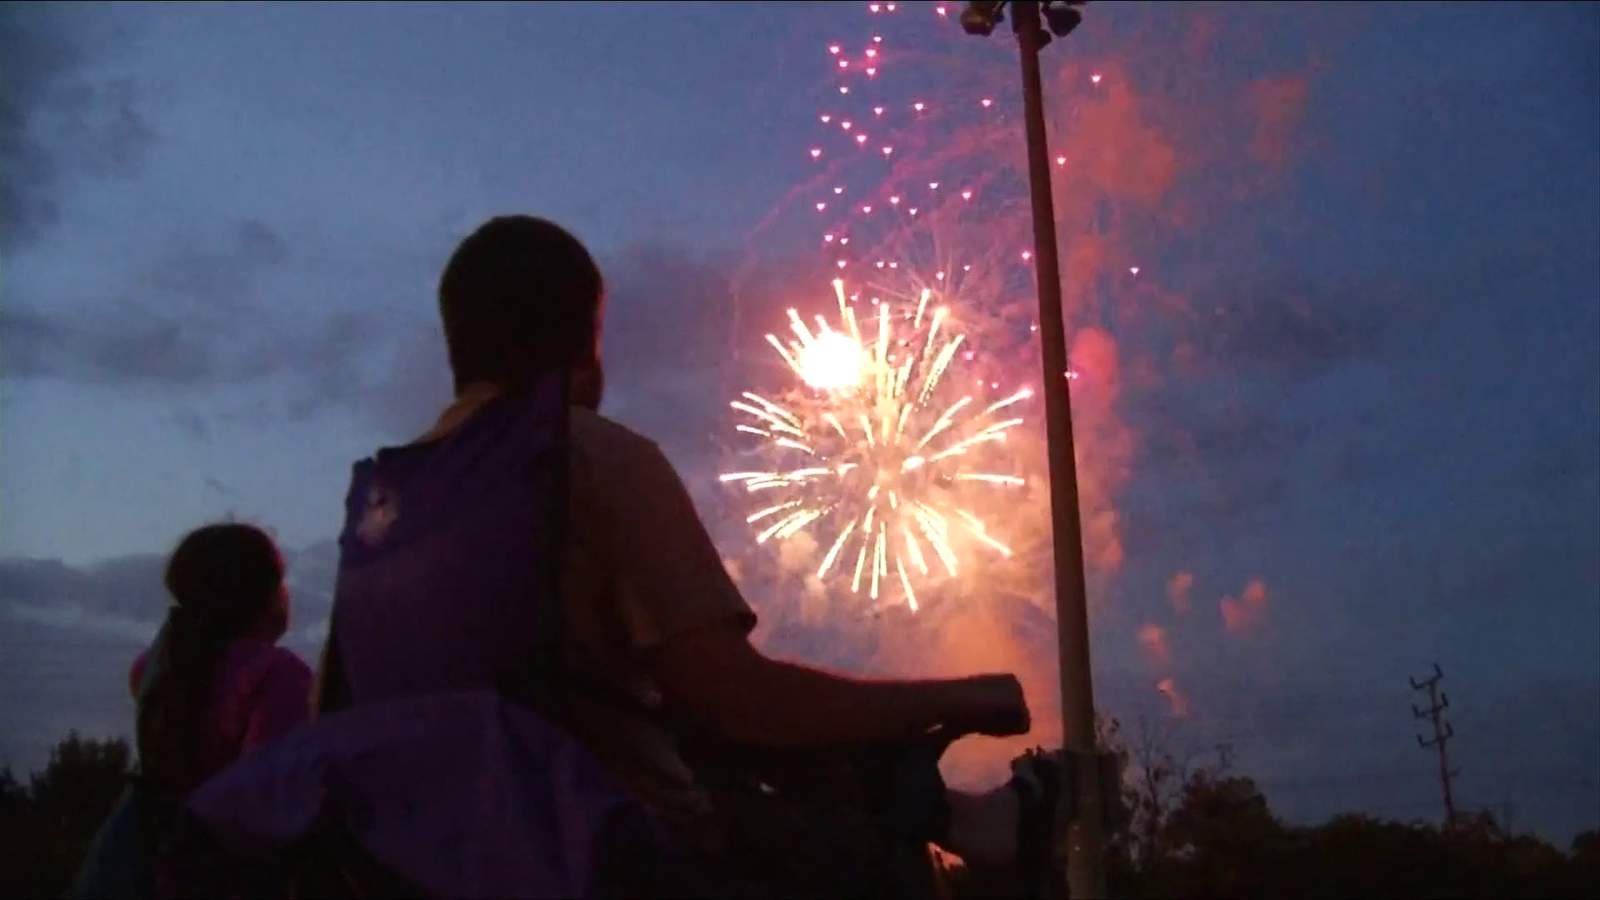 July 4th celebrations taking new shape this year across Southwest, Central Virginia